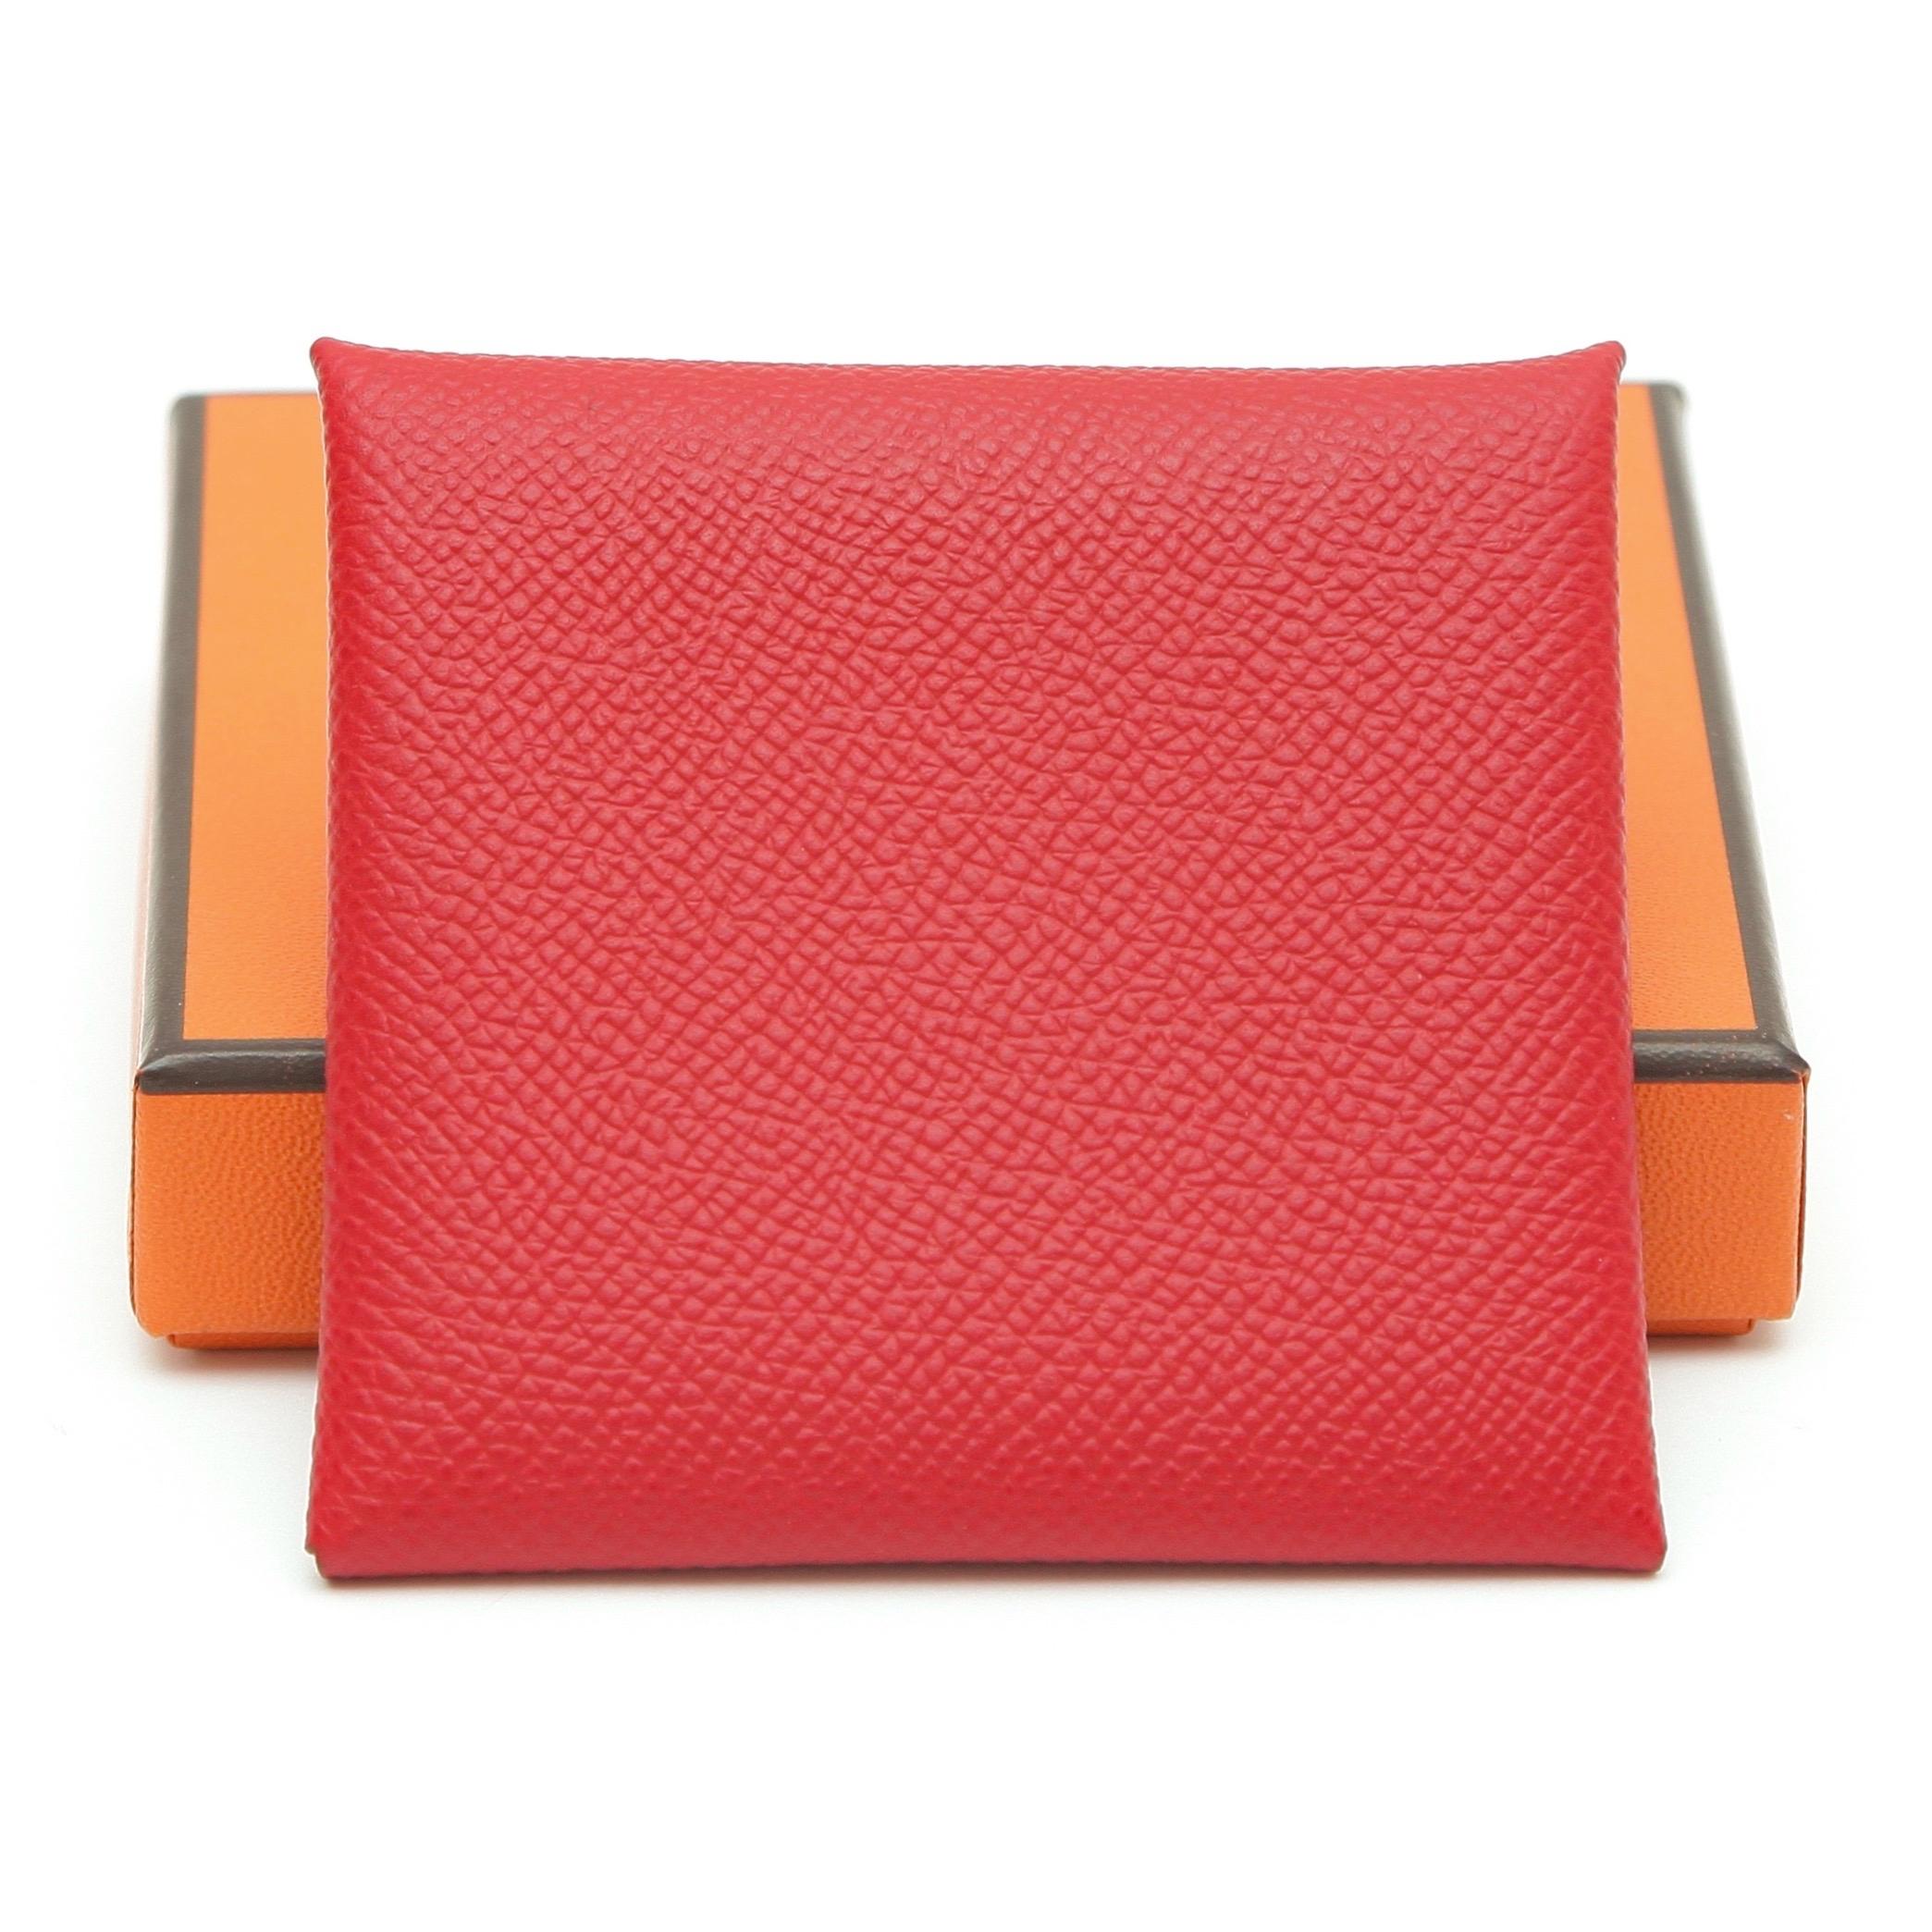 GUARANTEED AUTHENTIC HERMES ROUGE CASAQUE BASTIA COIN PURSE


Details:
- Red rouge casque epsom leather.
- Snap closure.
- Interior roomy for coins. 
- Signature printed inside.
- Comes with box.
- Inside craftsman code is not shown closely due to